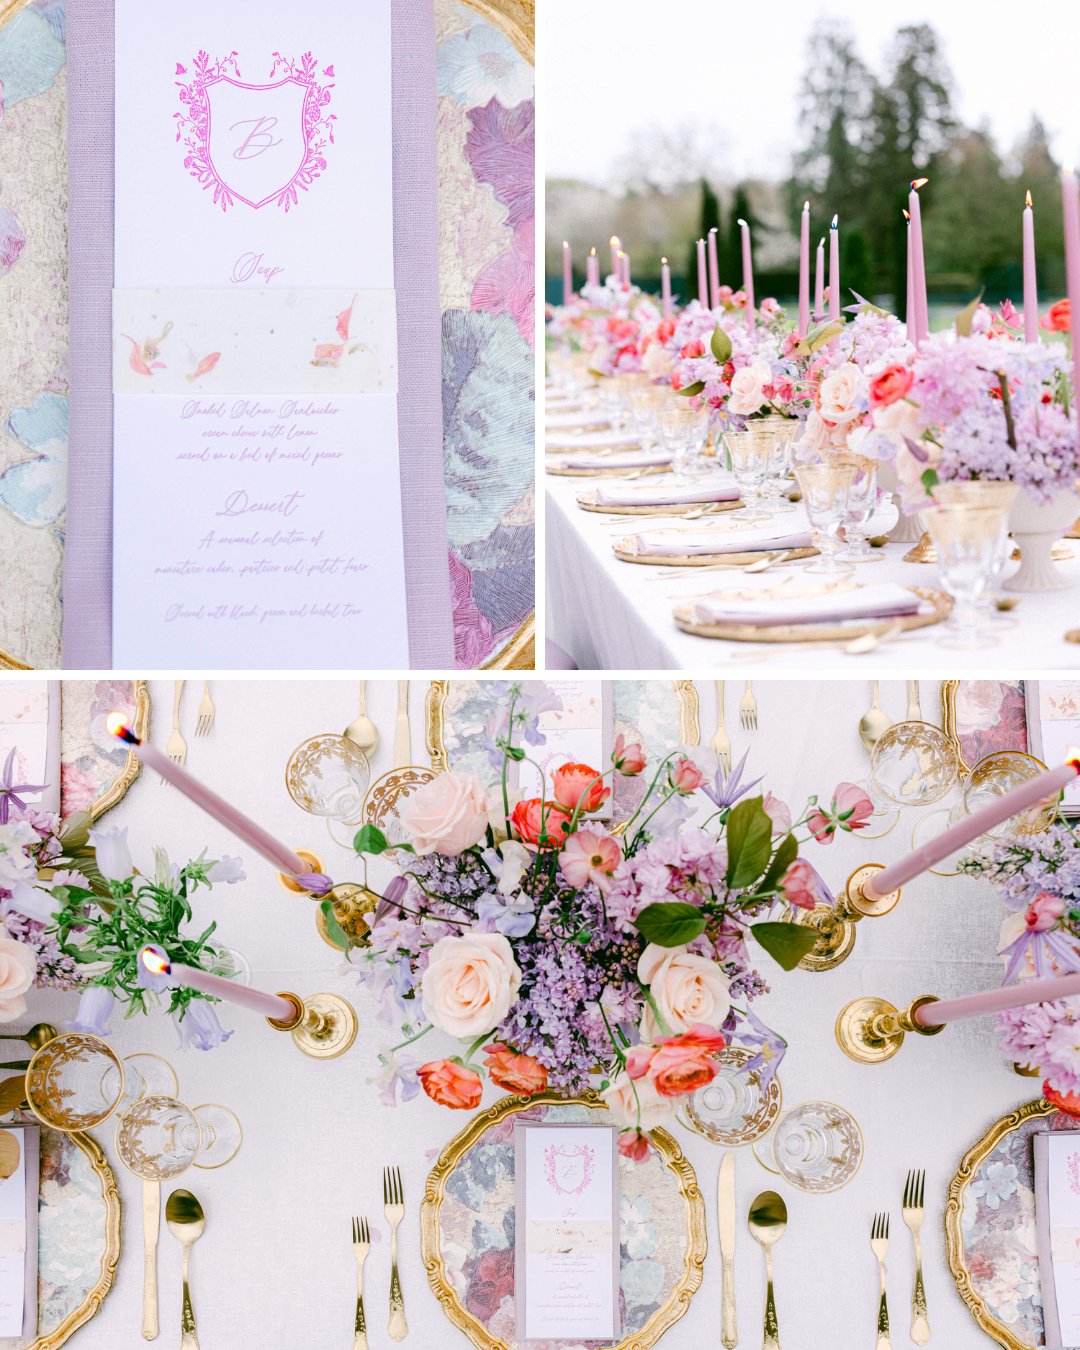 Collage of wedding centerpiece in soft pink colors. A an embossed Barbie pink wedding invitation is featured.